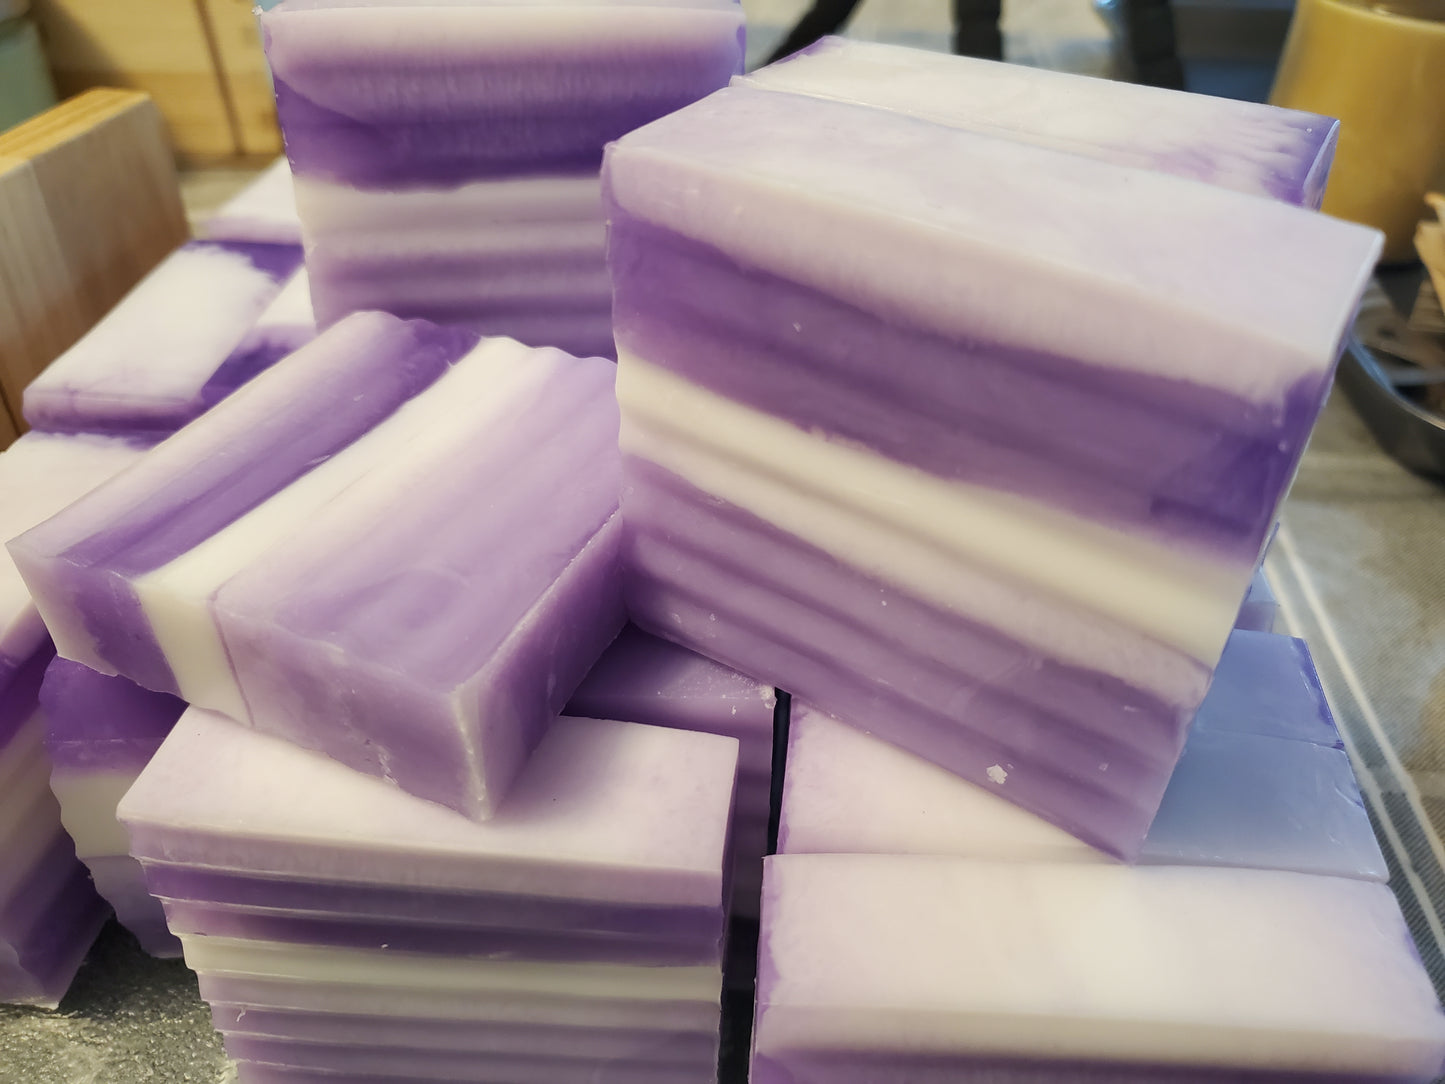 Lavender and Bergamot Shea Butter and Glycerin Soap